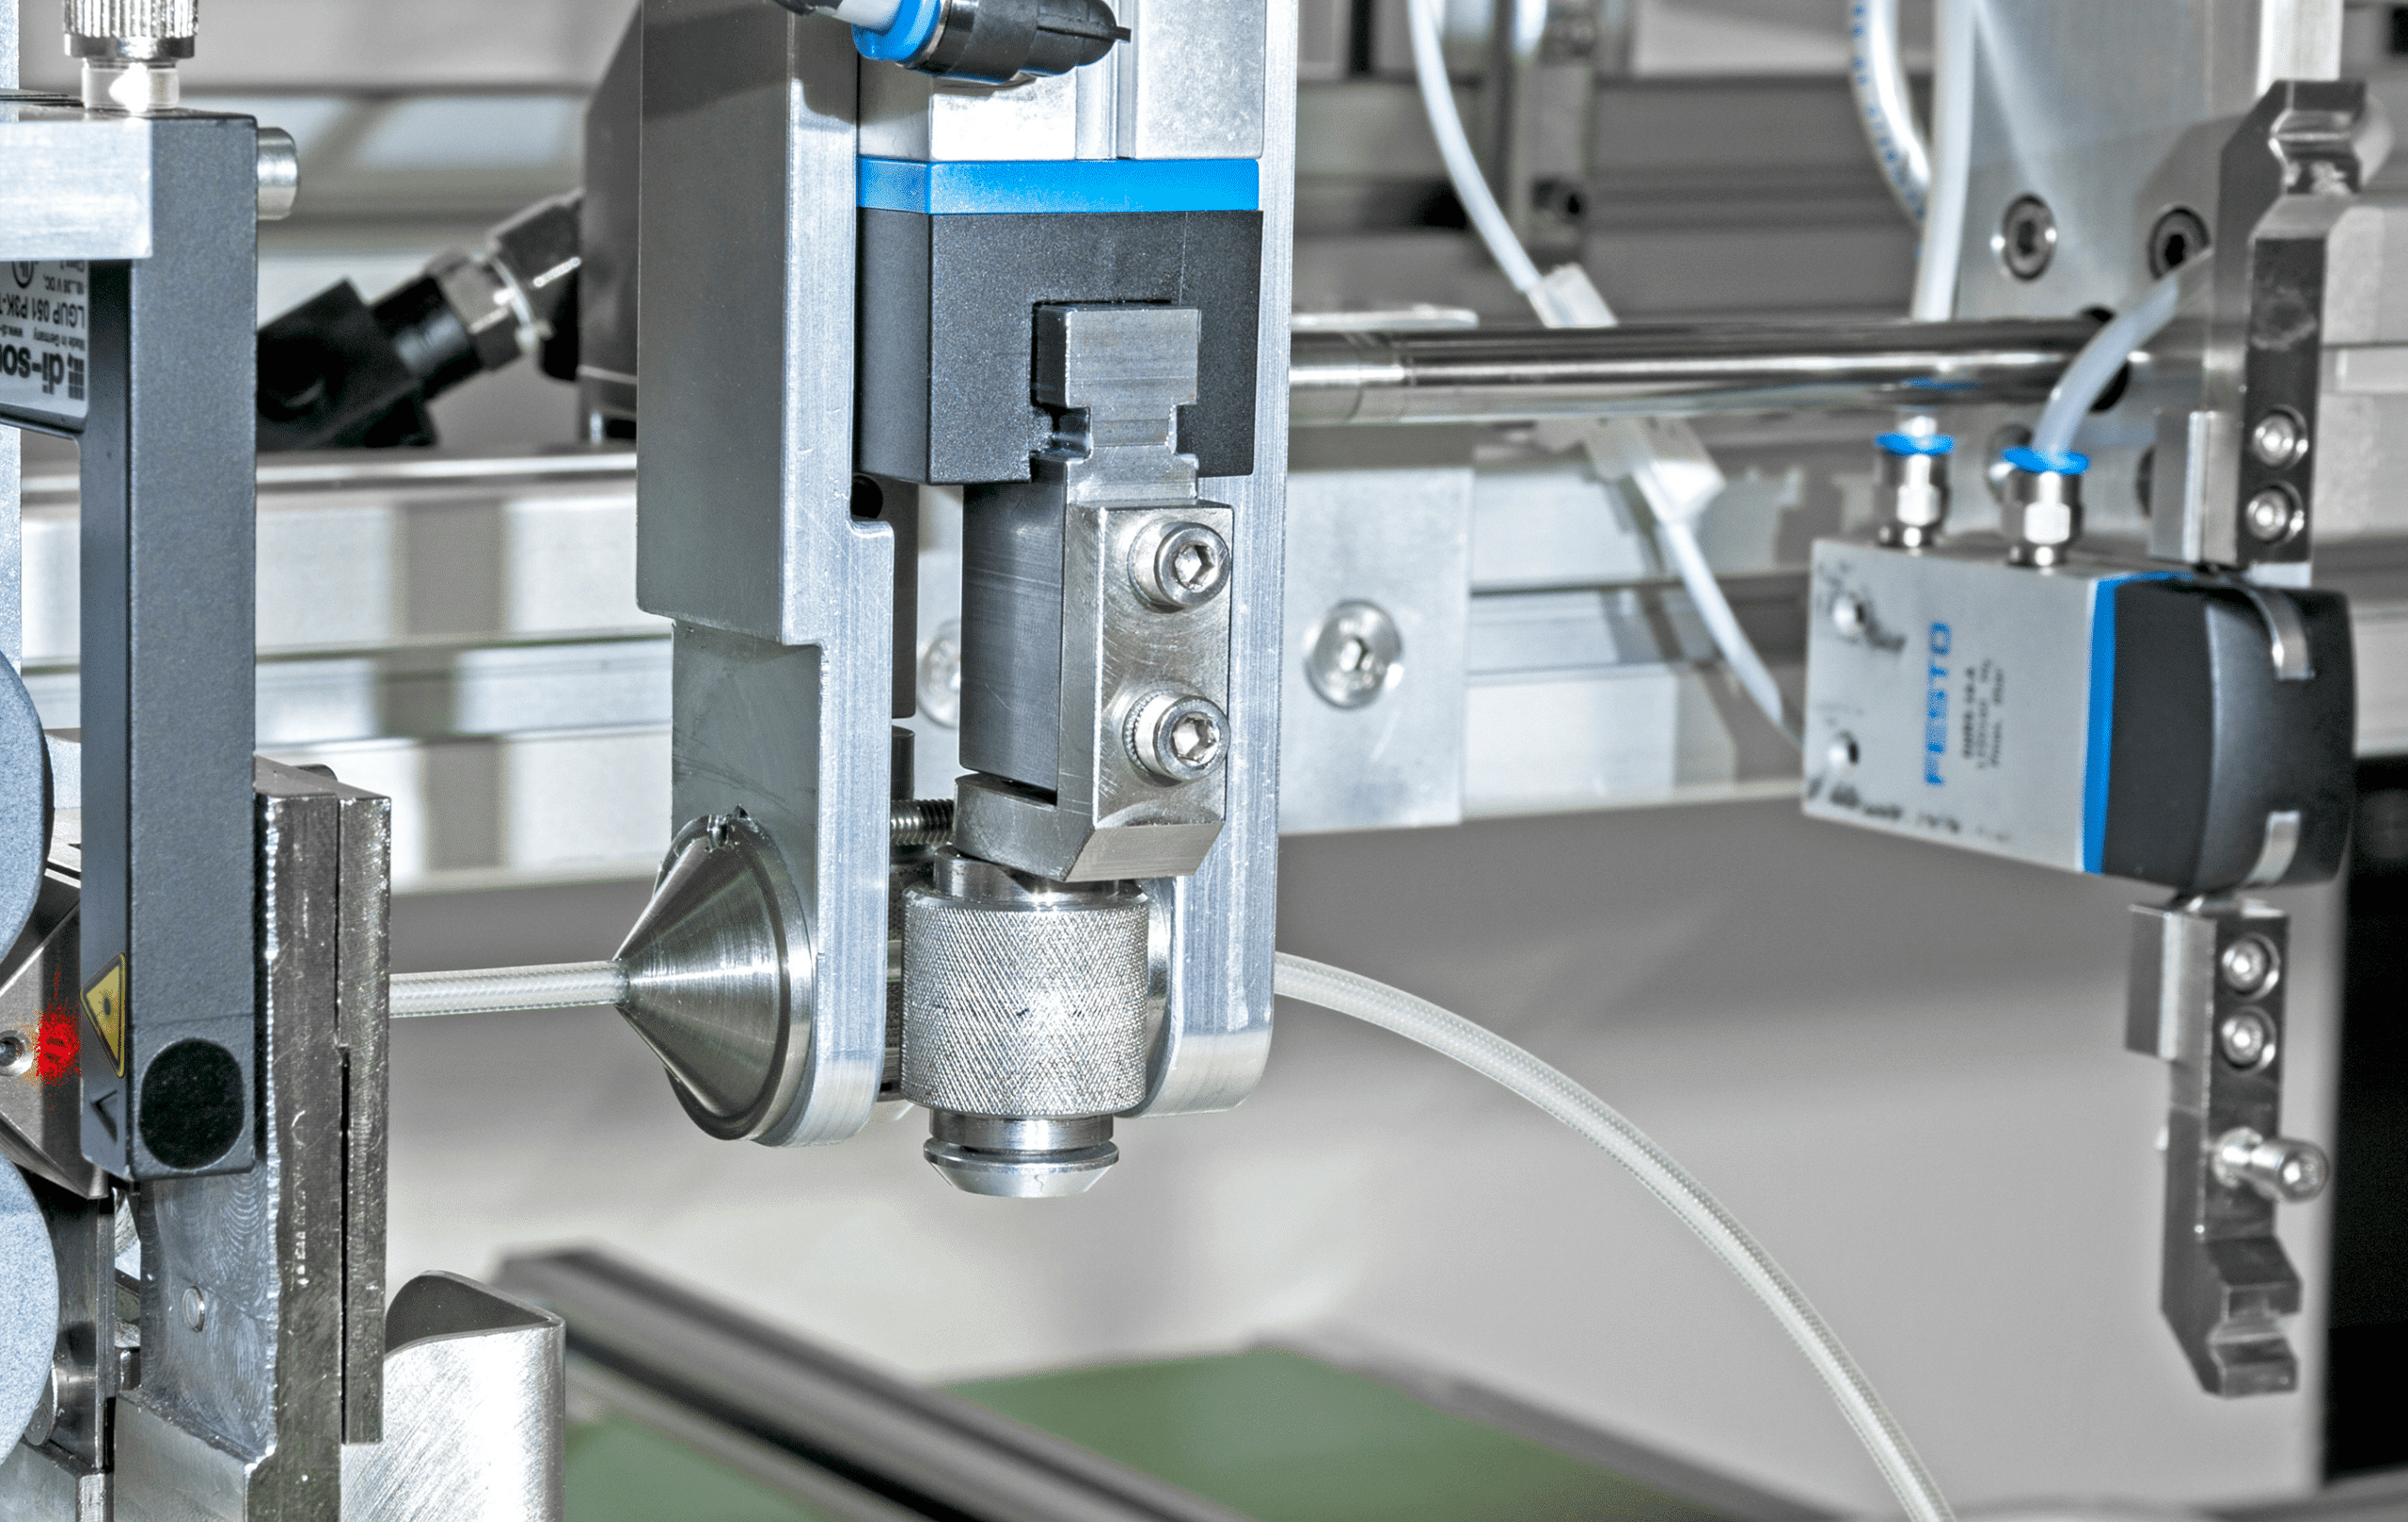 Feeding of the automatic catheter manufacturing machine